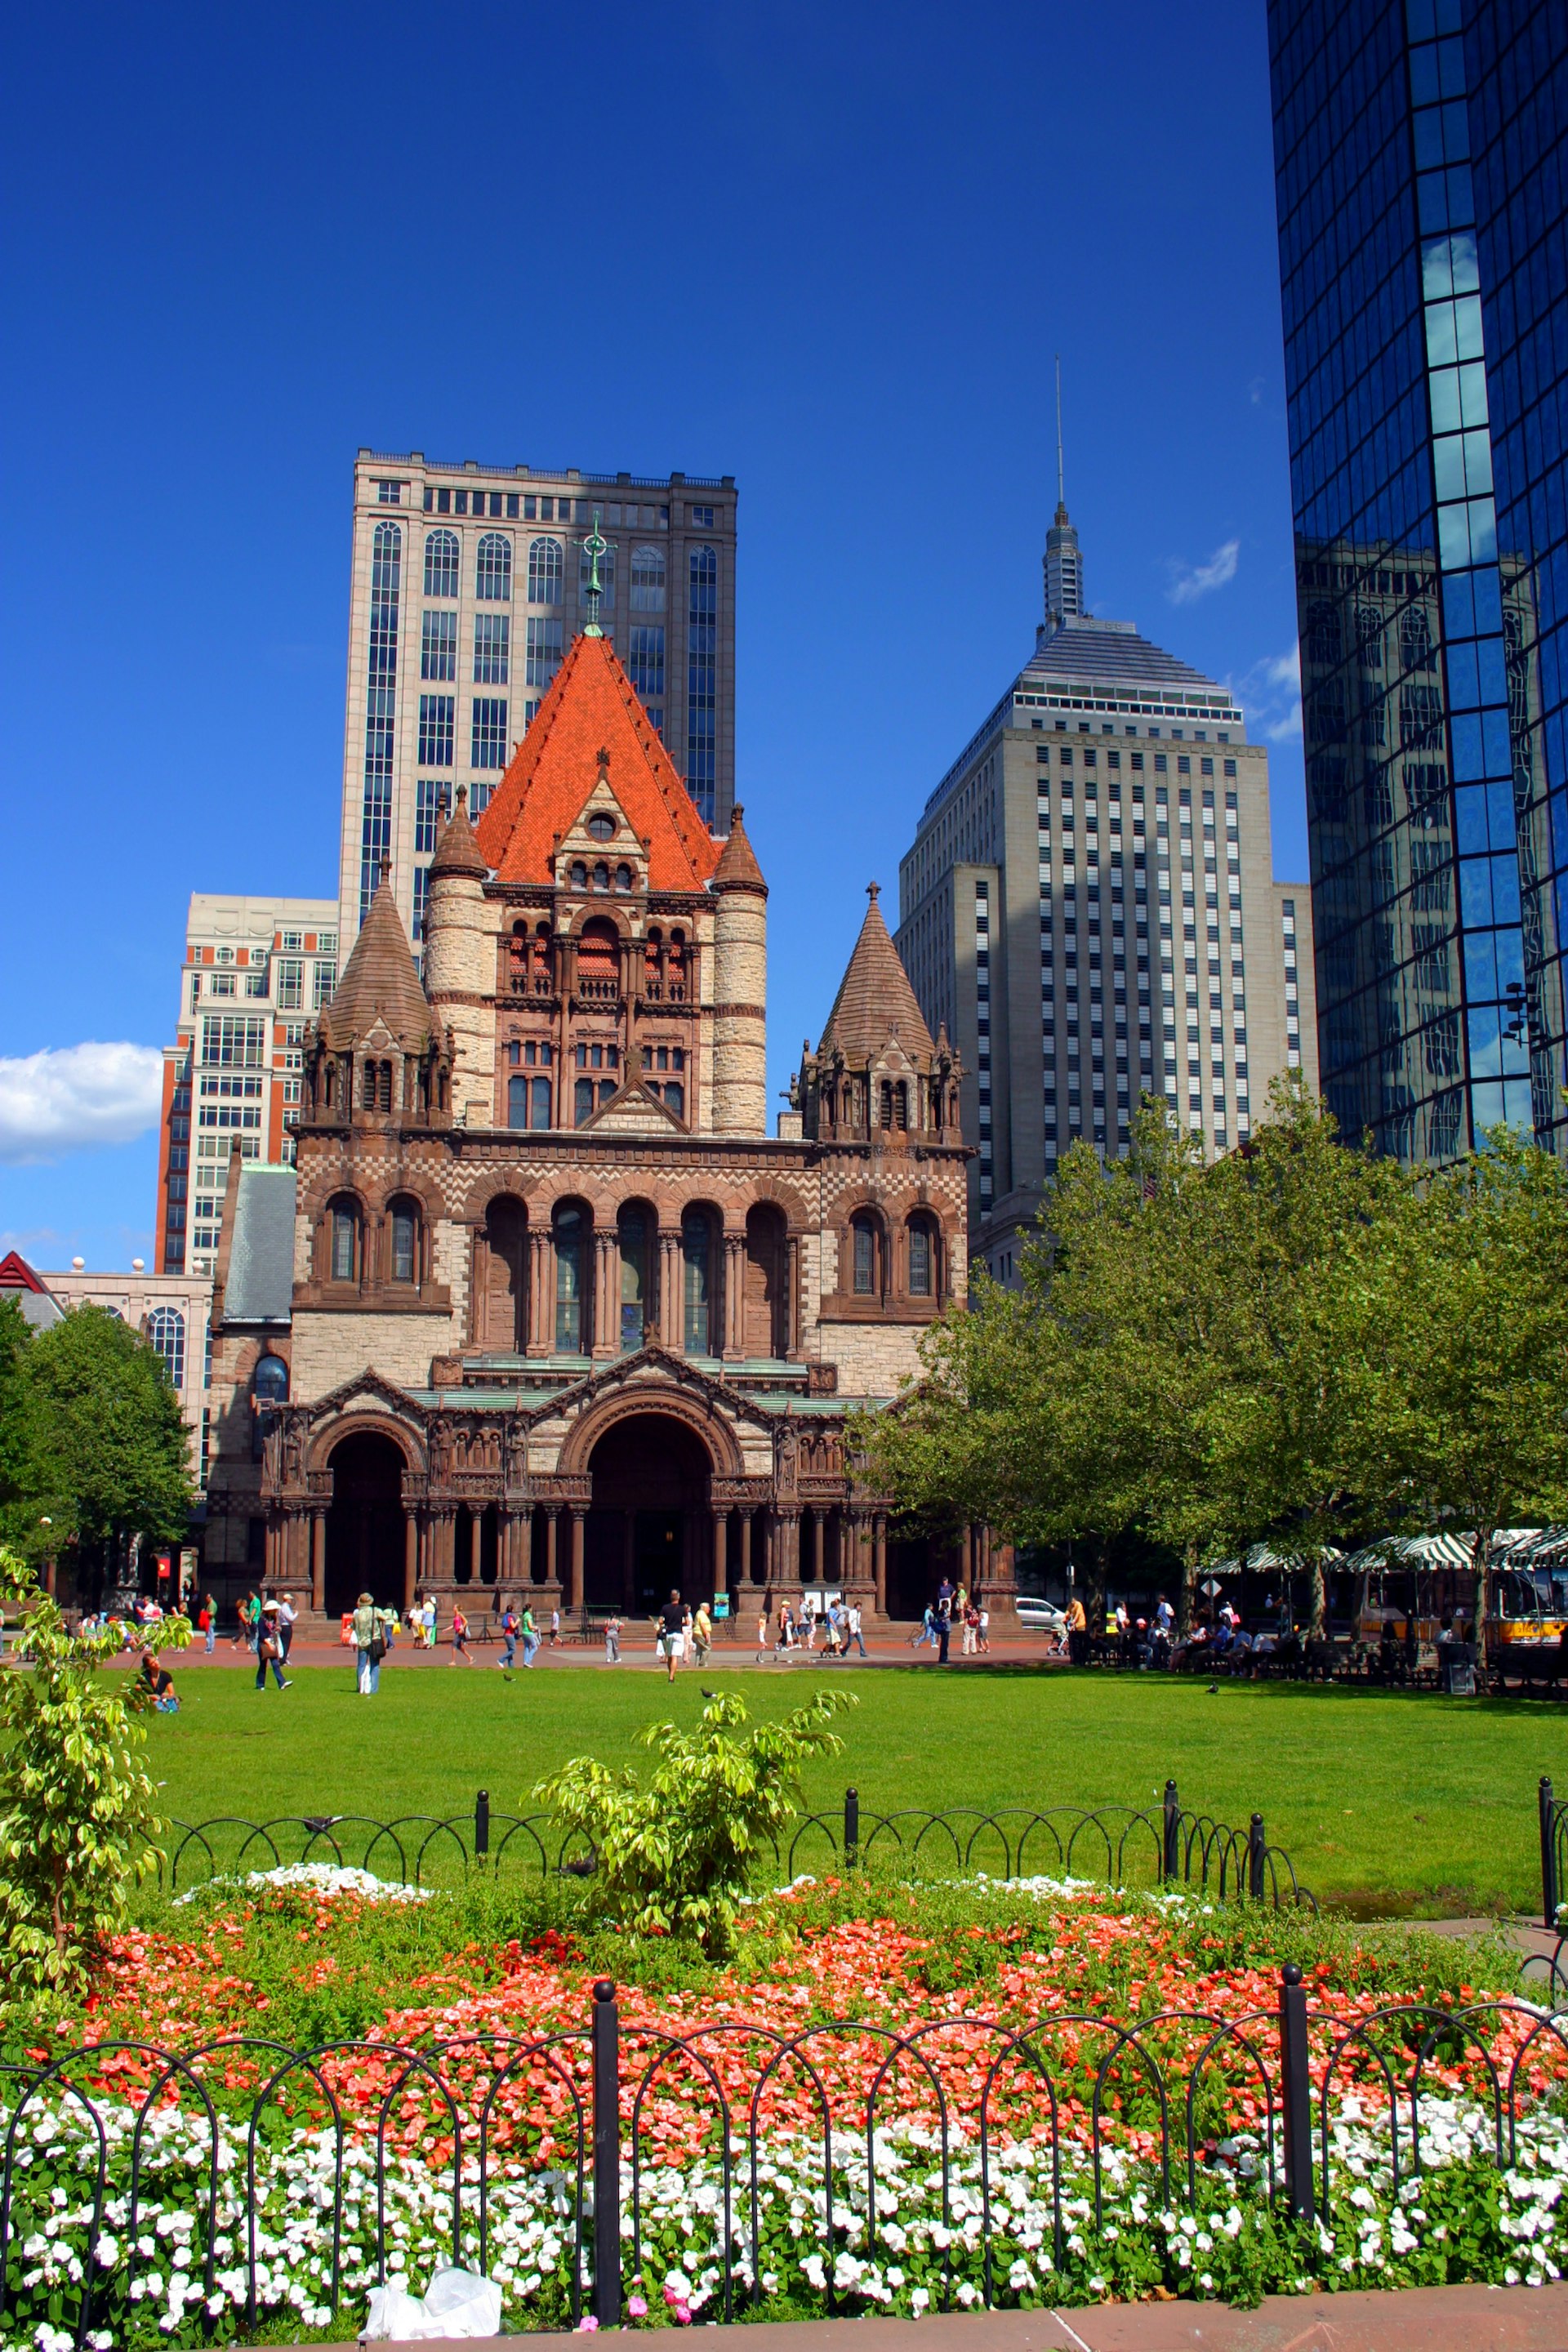 A Romanesque-style church in a large green space surrounded by skyscrapers